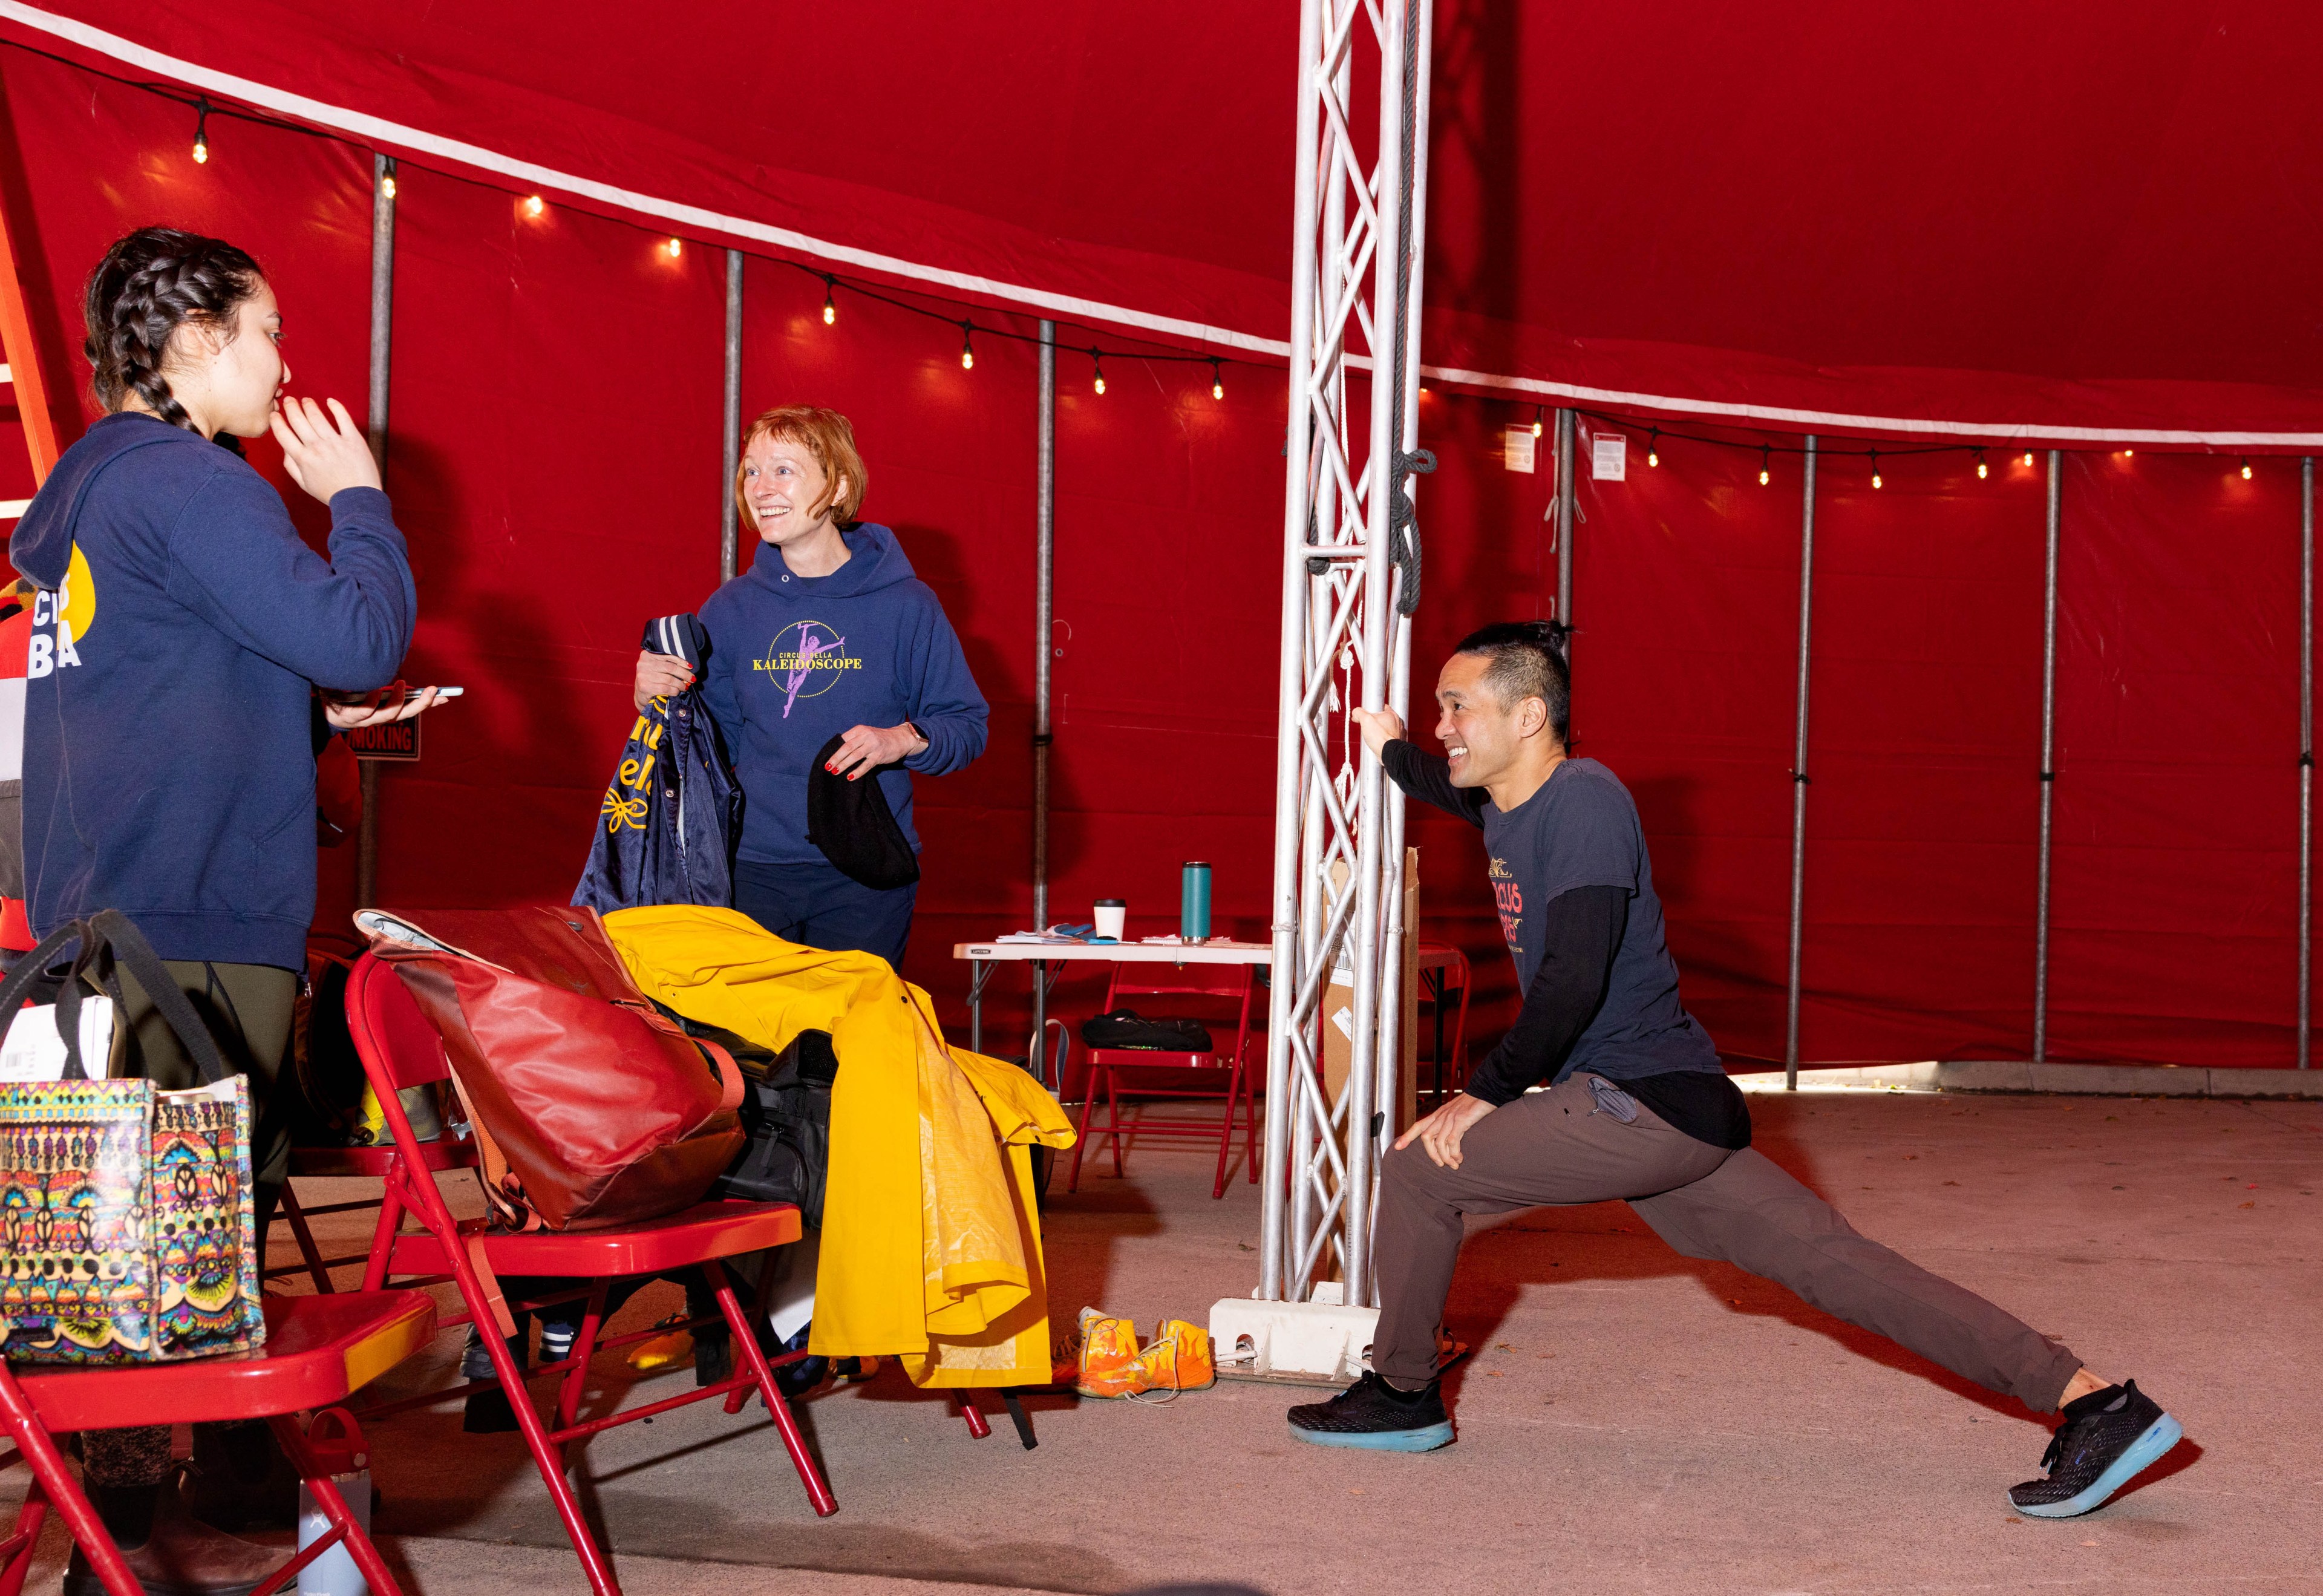 People chat and someone stretches inside the red circus tent.